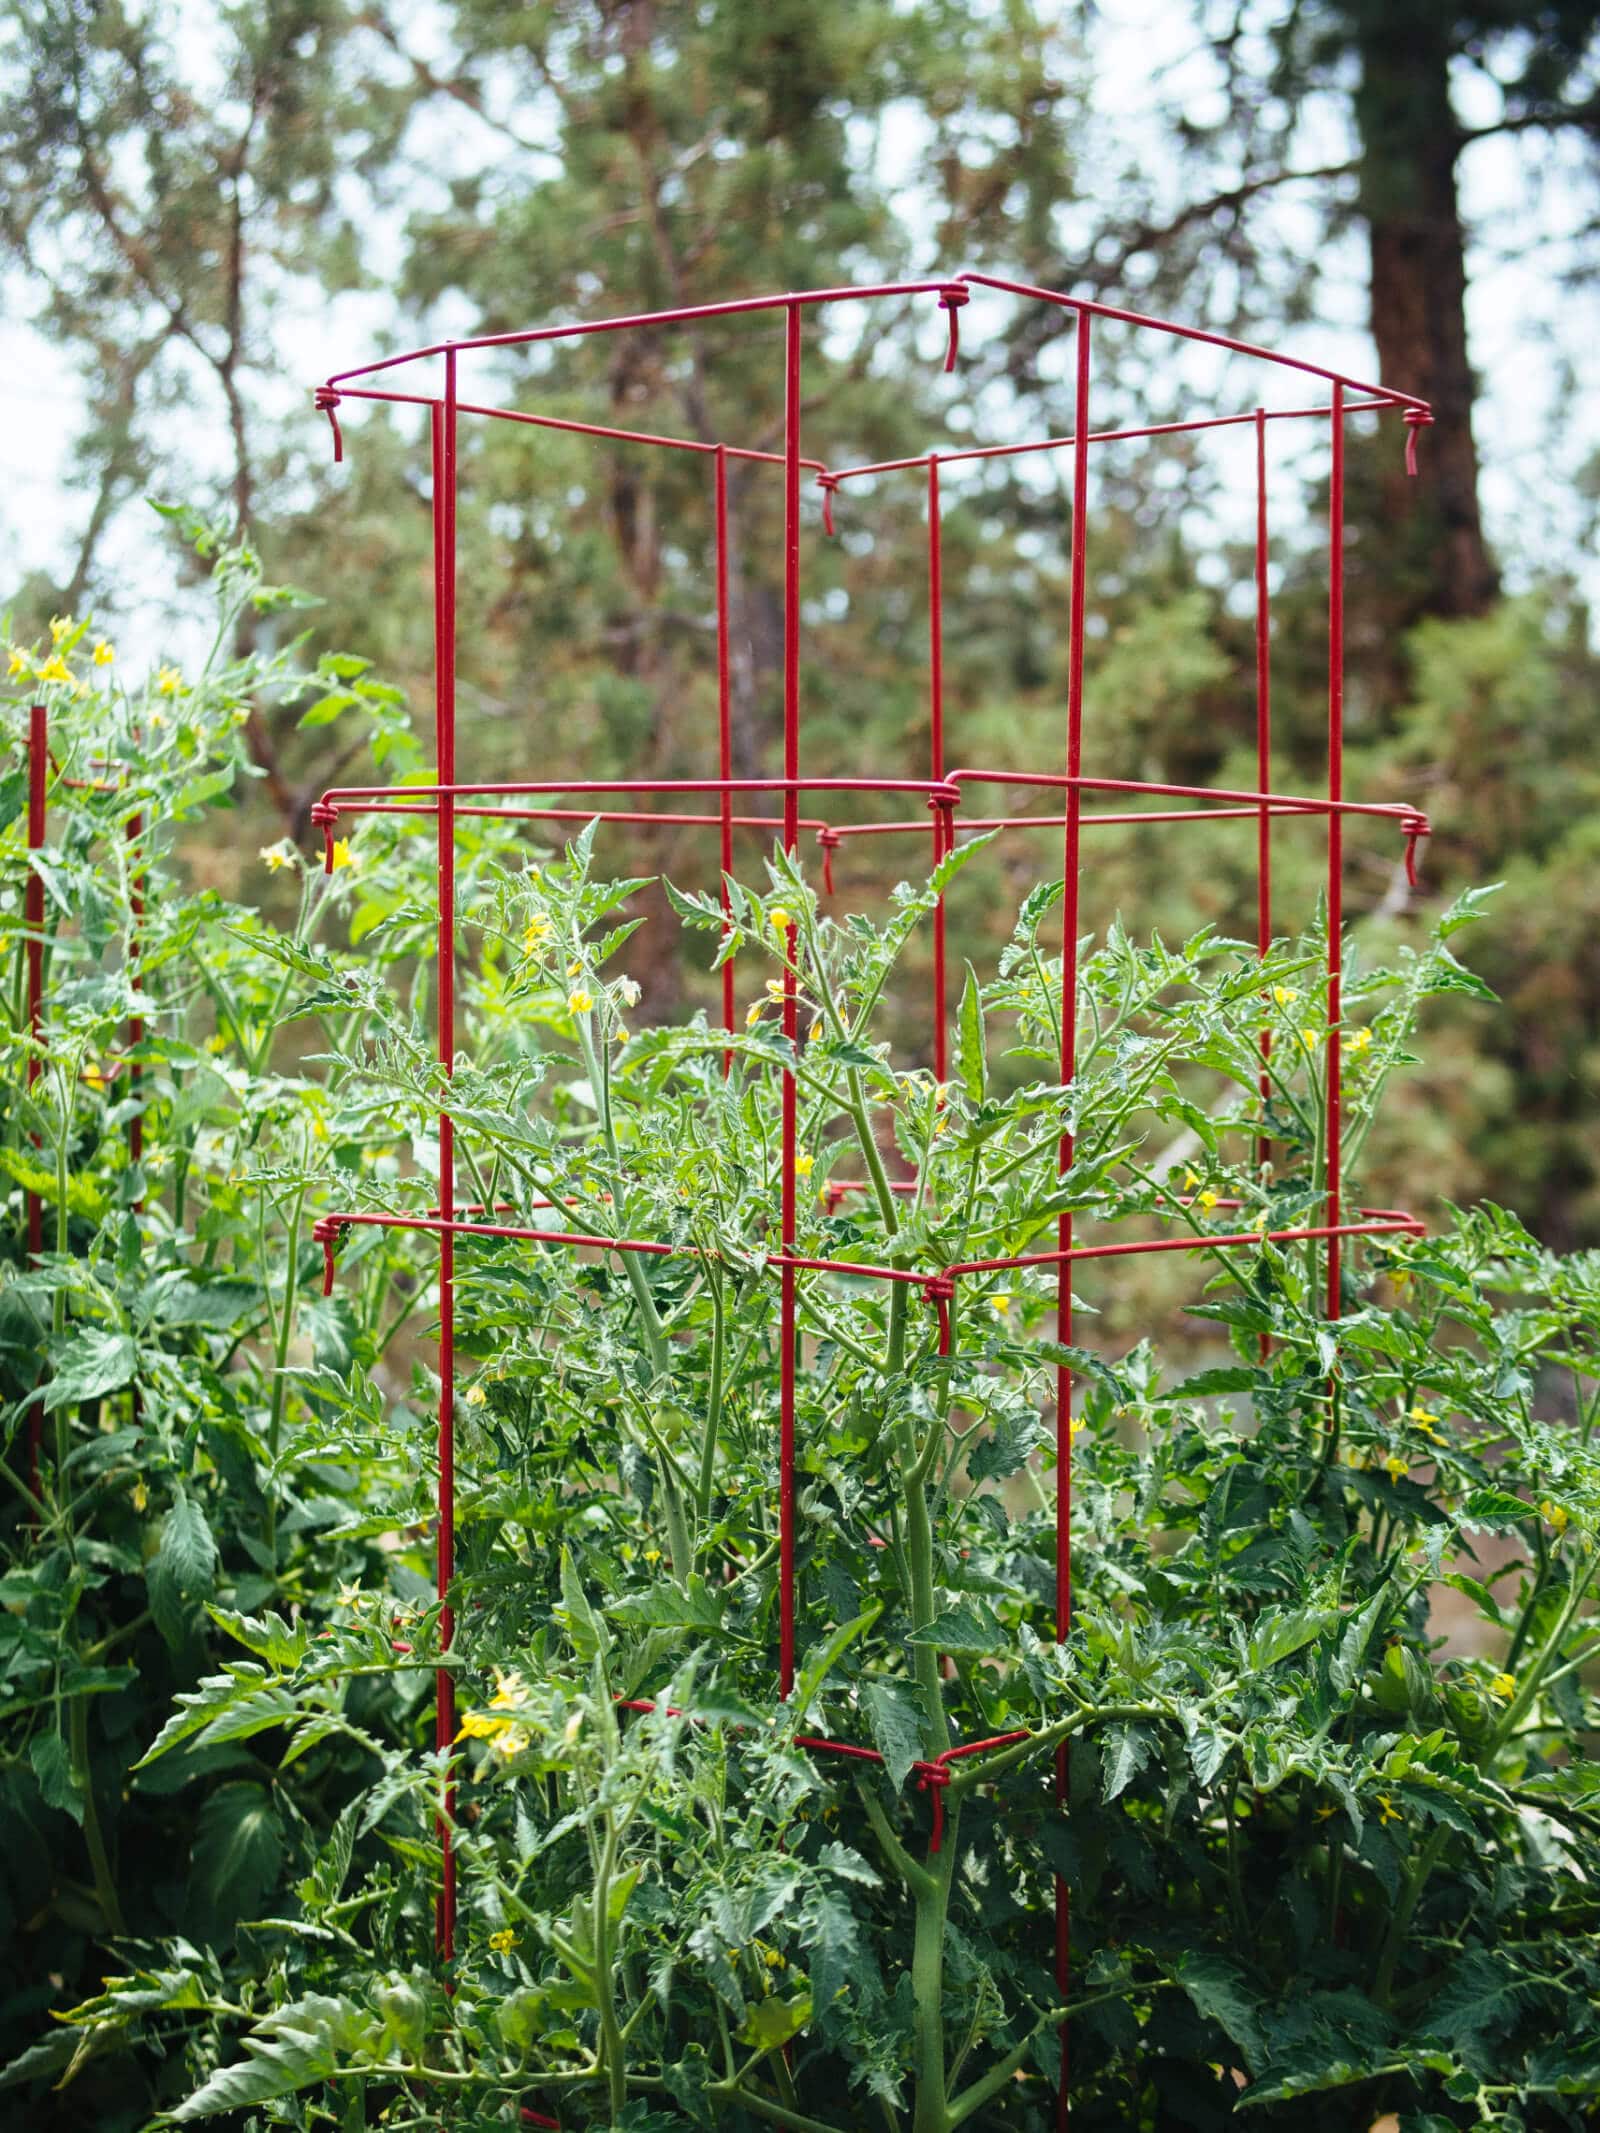 Stake, cage, or trellis your tomato plants early